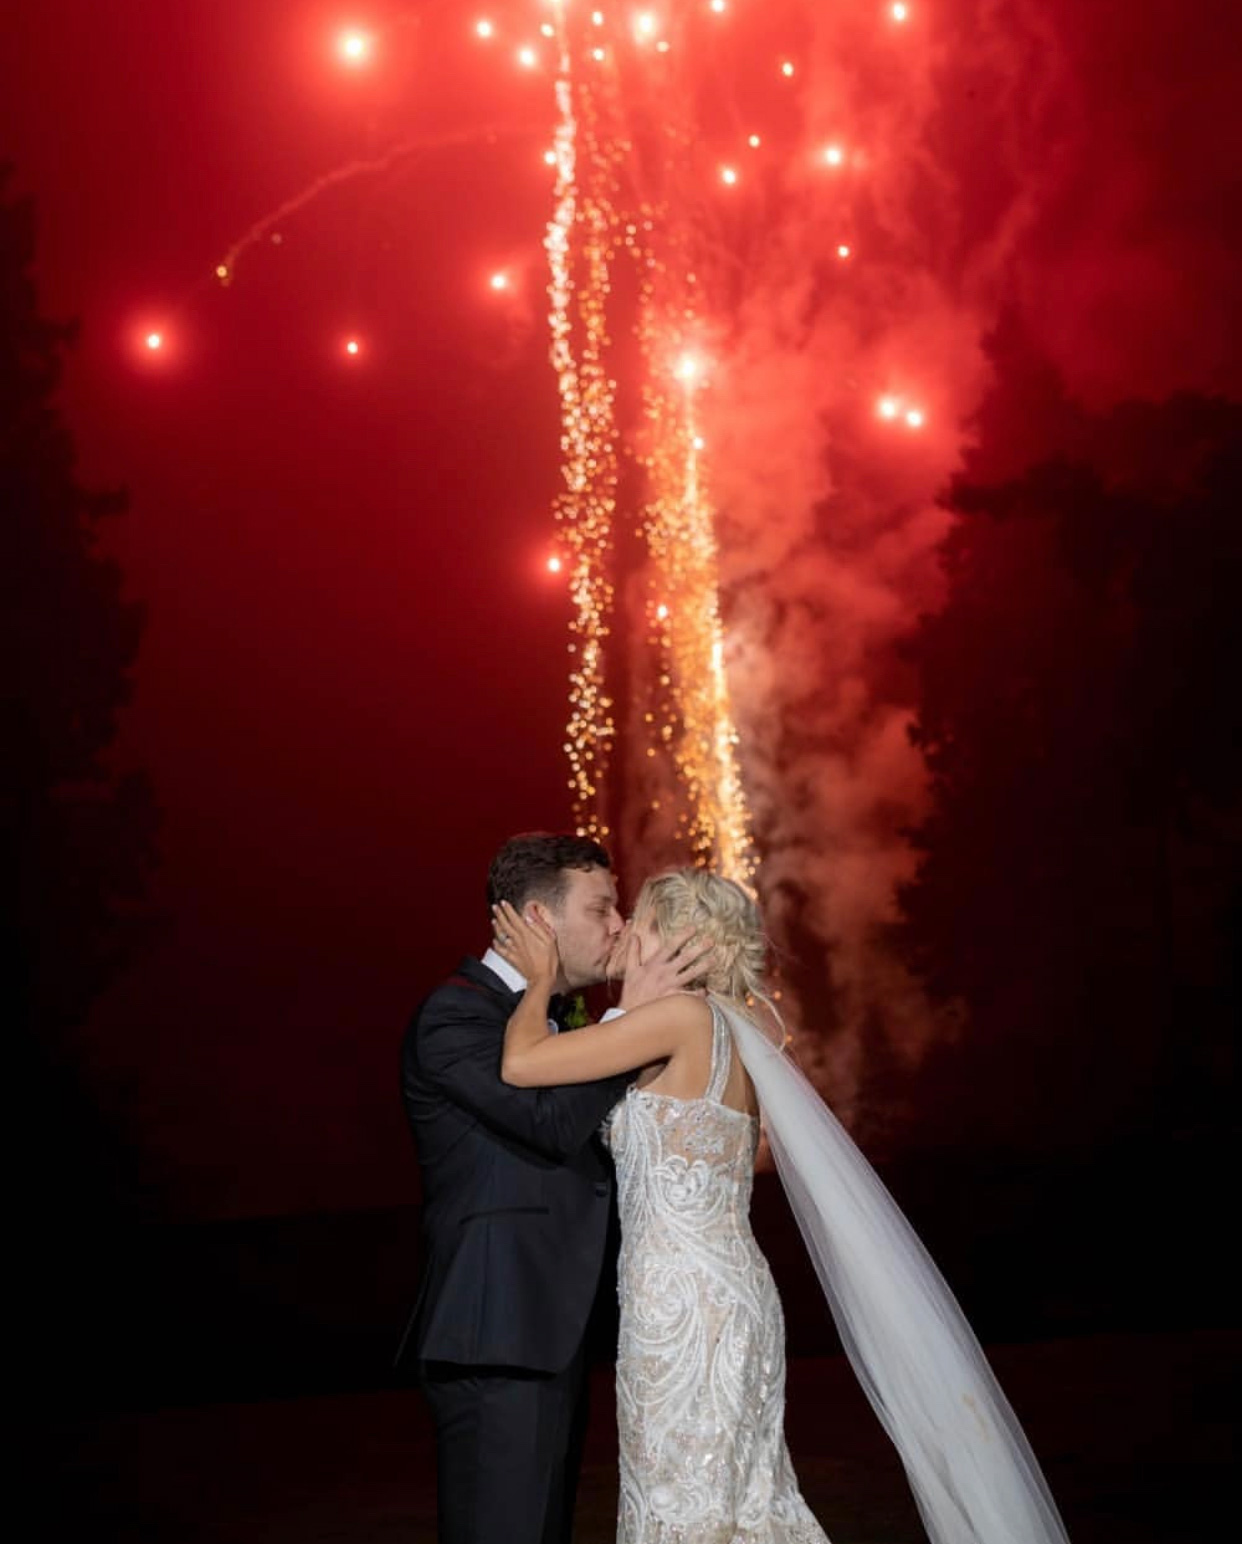 COMBERMERE ABBEY wedding with fireworks